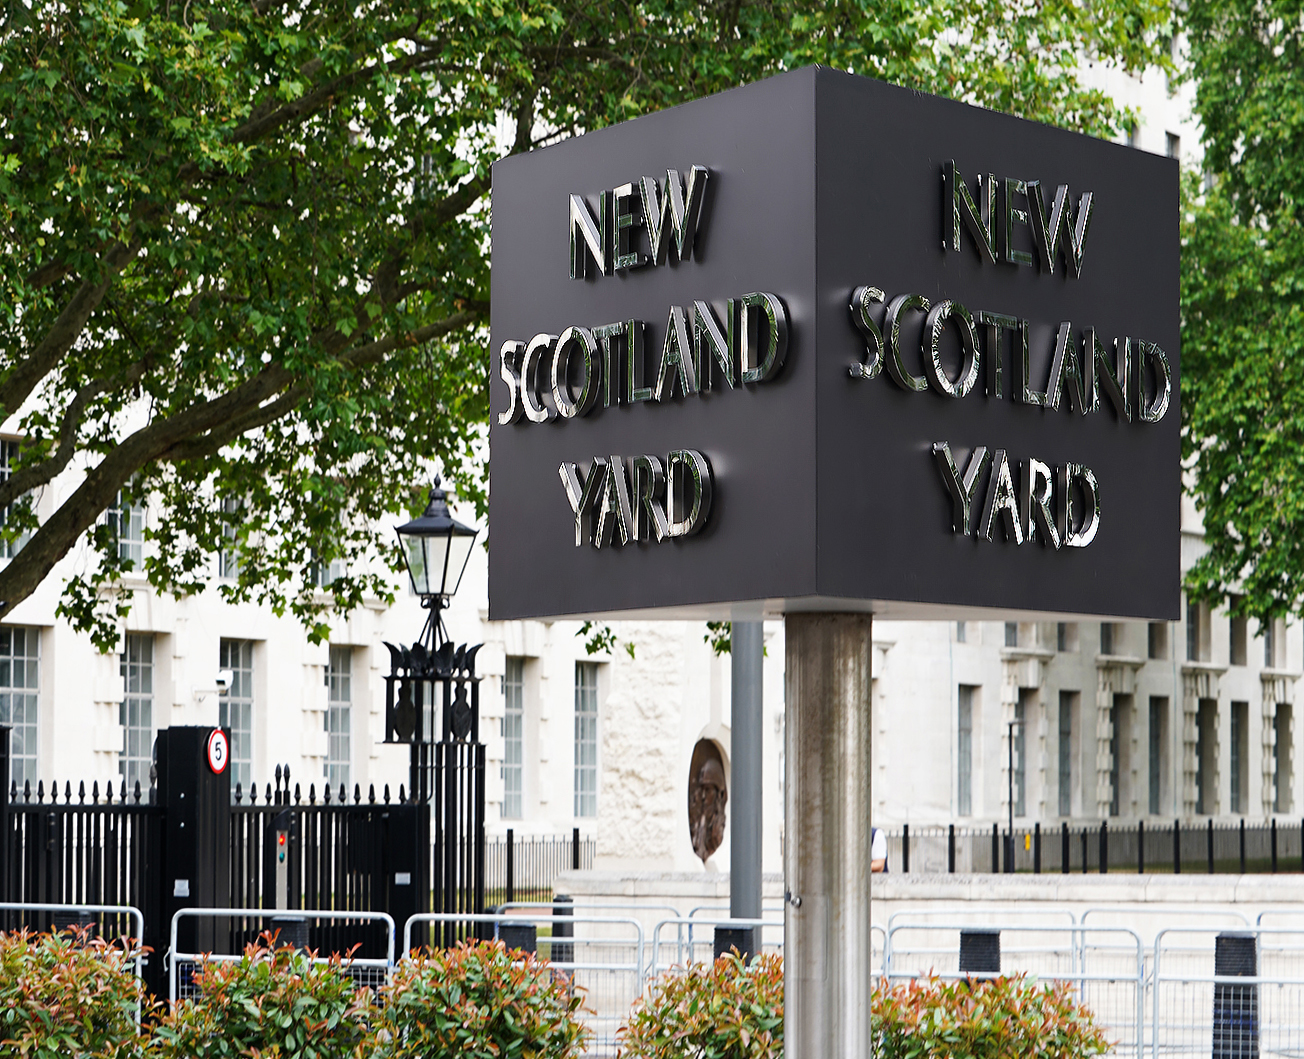 Met Police to issue 20 fines for Downing Street lockdown parties, The Manc